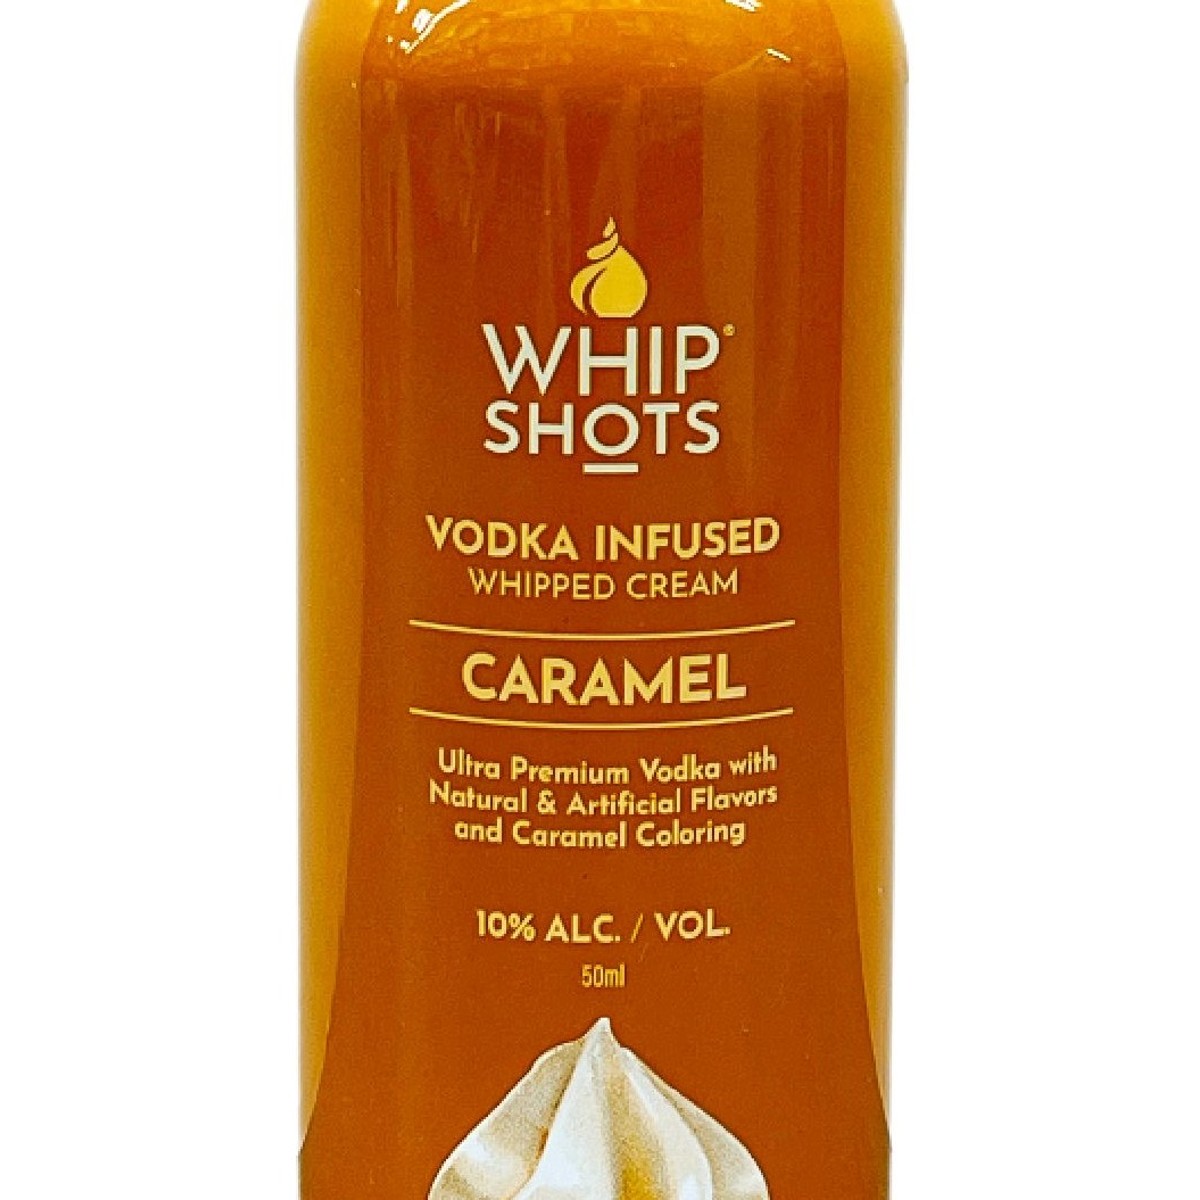 Whip Shots Vodka Infused Whipped Cream 3 Pack (375ml)